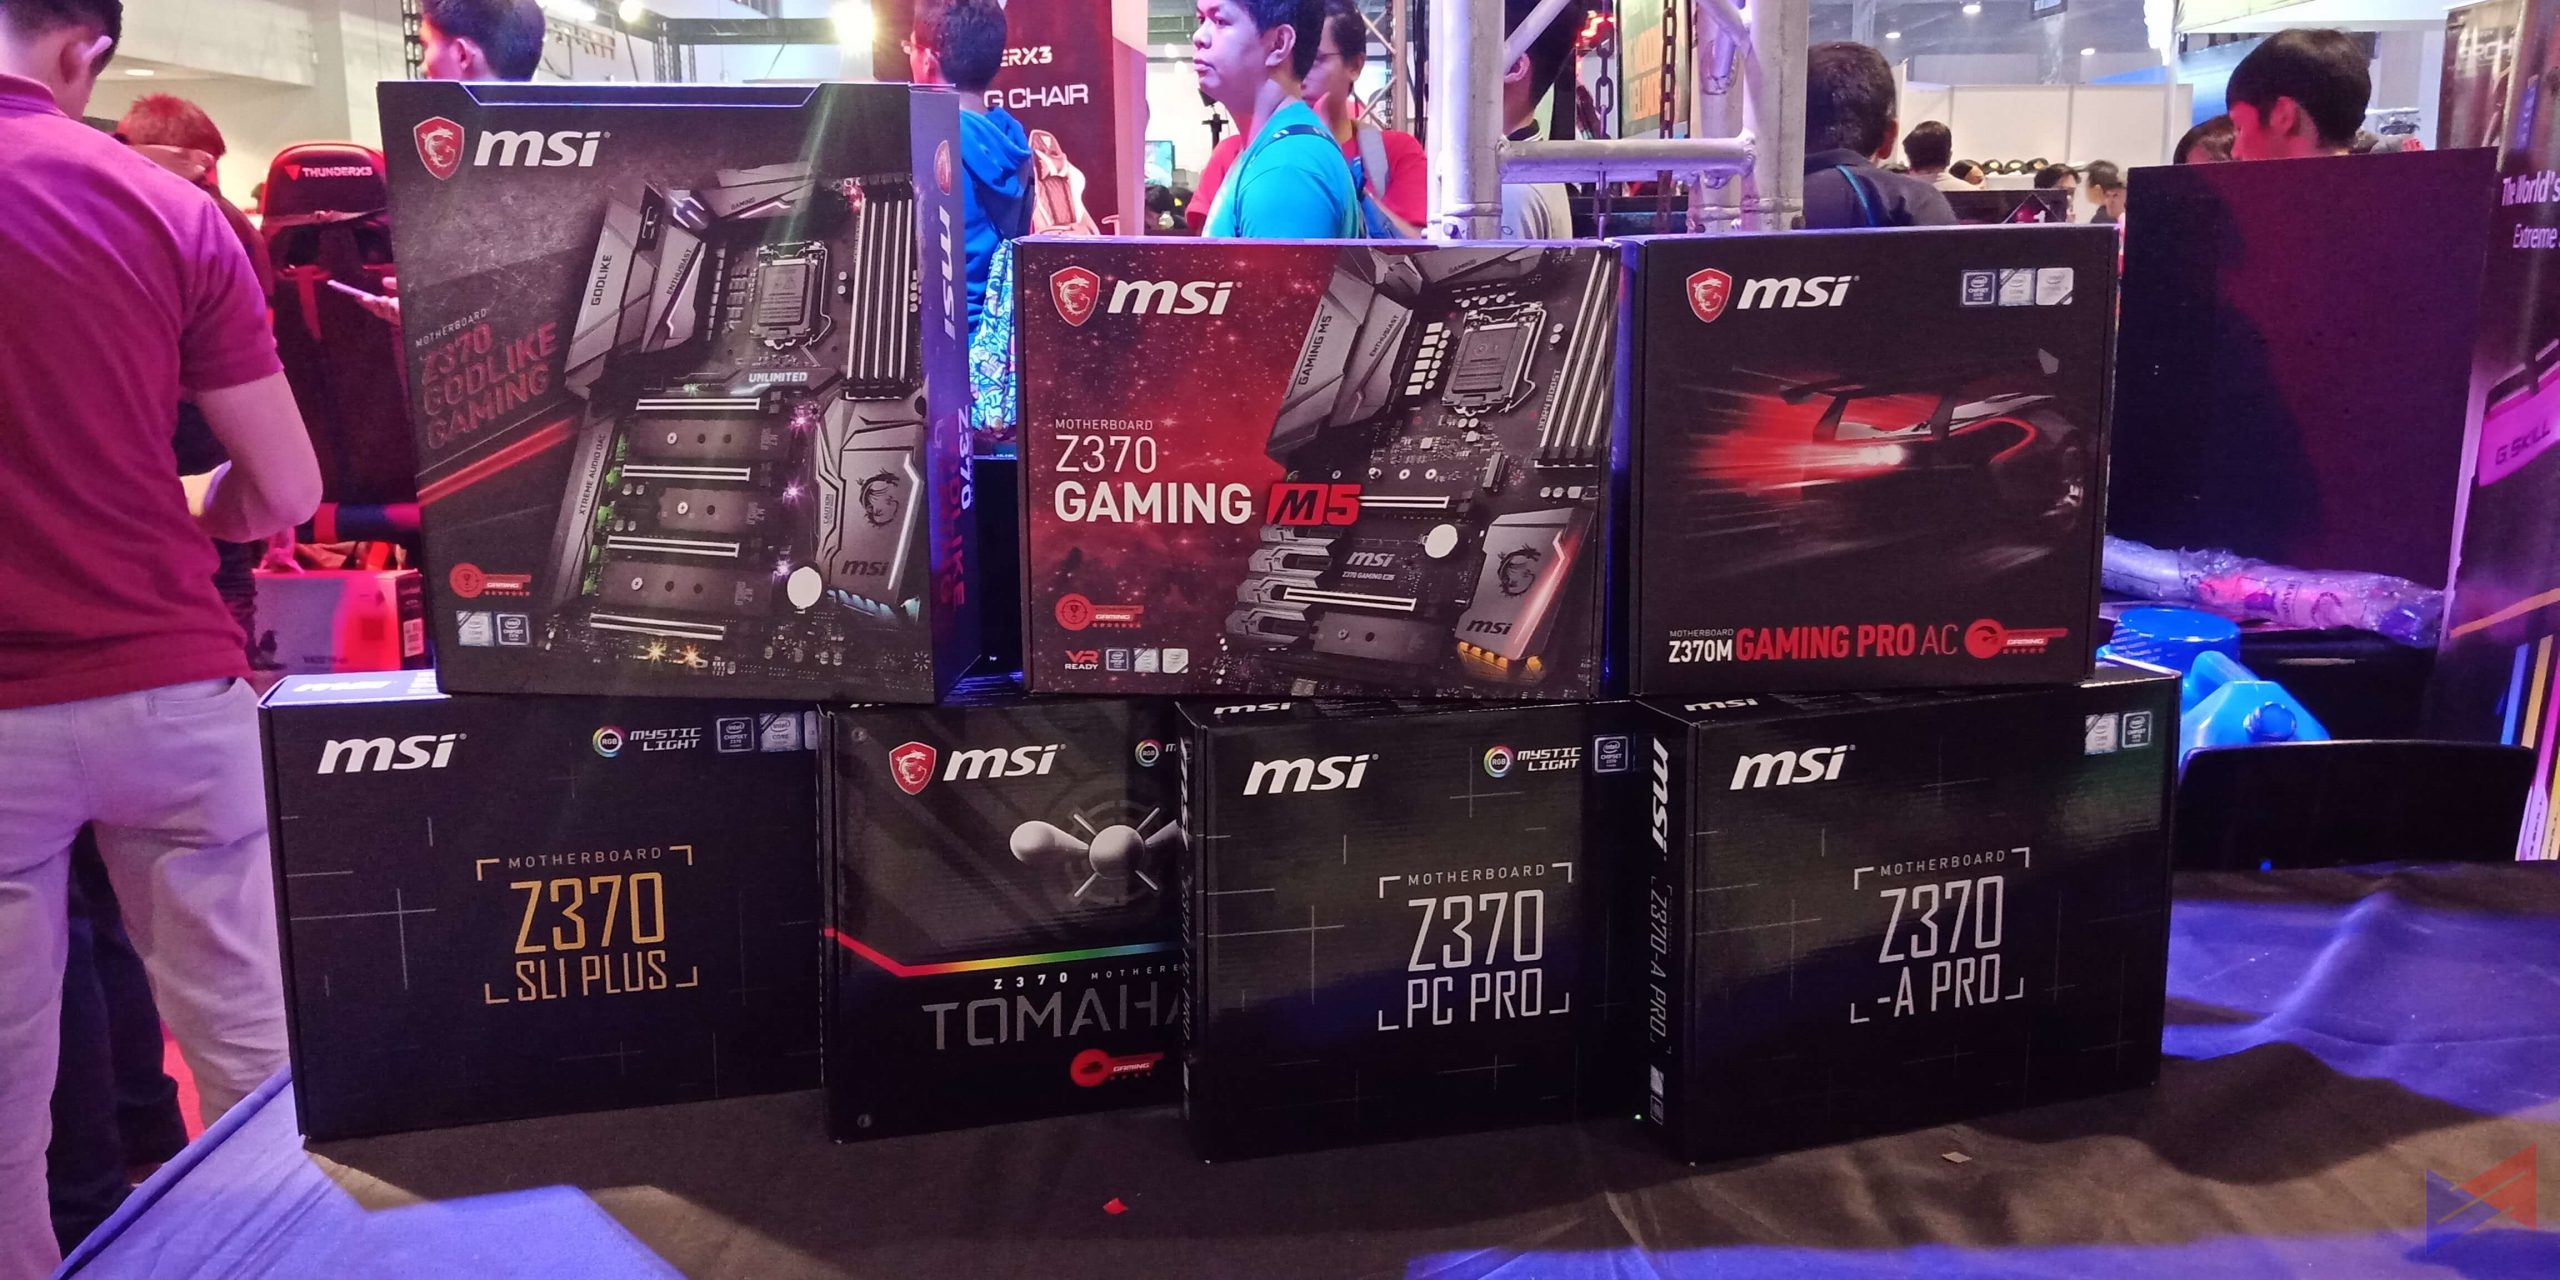 Take Your Game to the Next Level with MSI’s New Products!